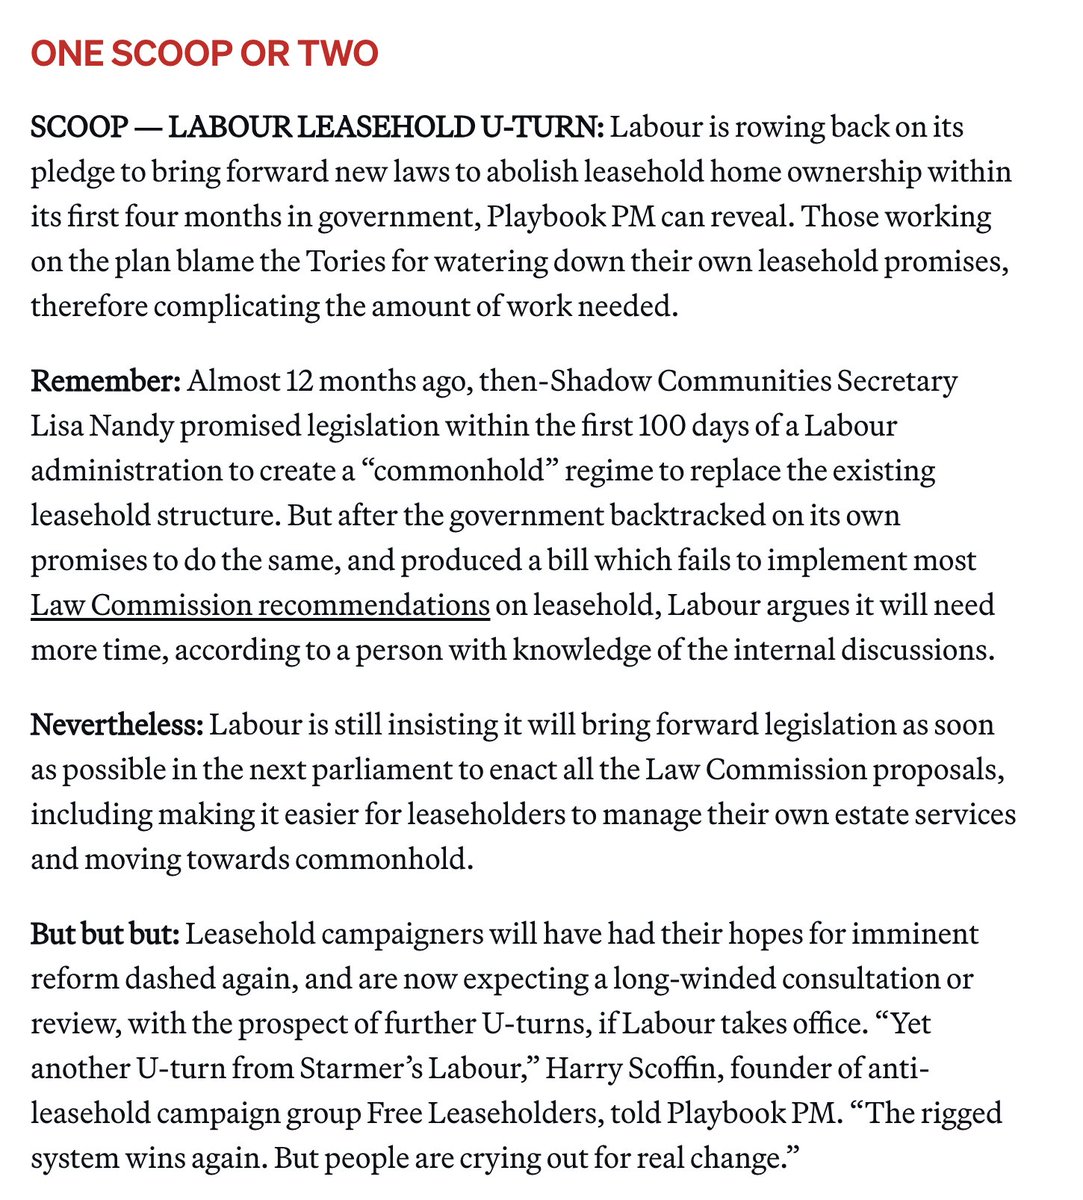 🚨@UKLabour drops @lisanandy pledge for radical leasehold legislation in first 100 days🚨 Shocking news from @e_casalicchio Playbook briefing. No guarantee leasehold and commonhold reform will be in the @UKLabour manifesto either. Where do we go now? politico.eu/newsletter/lon…